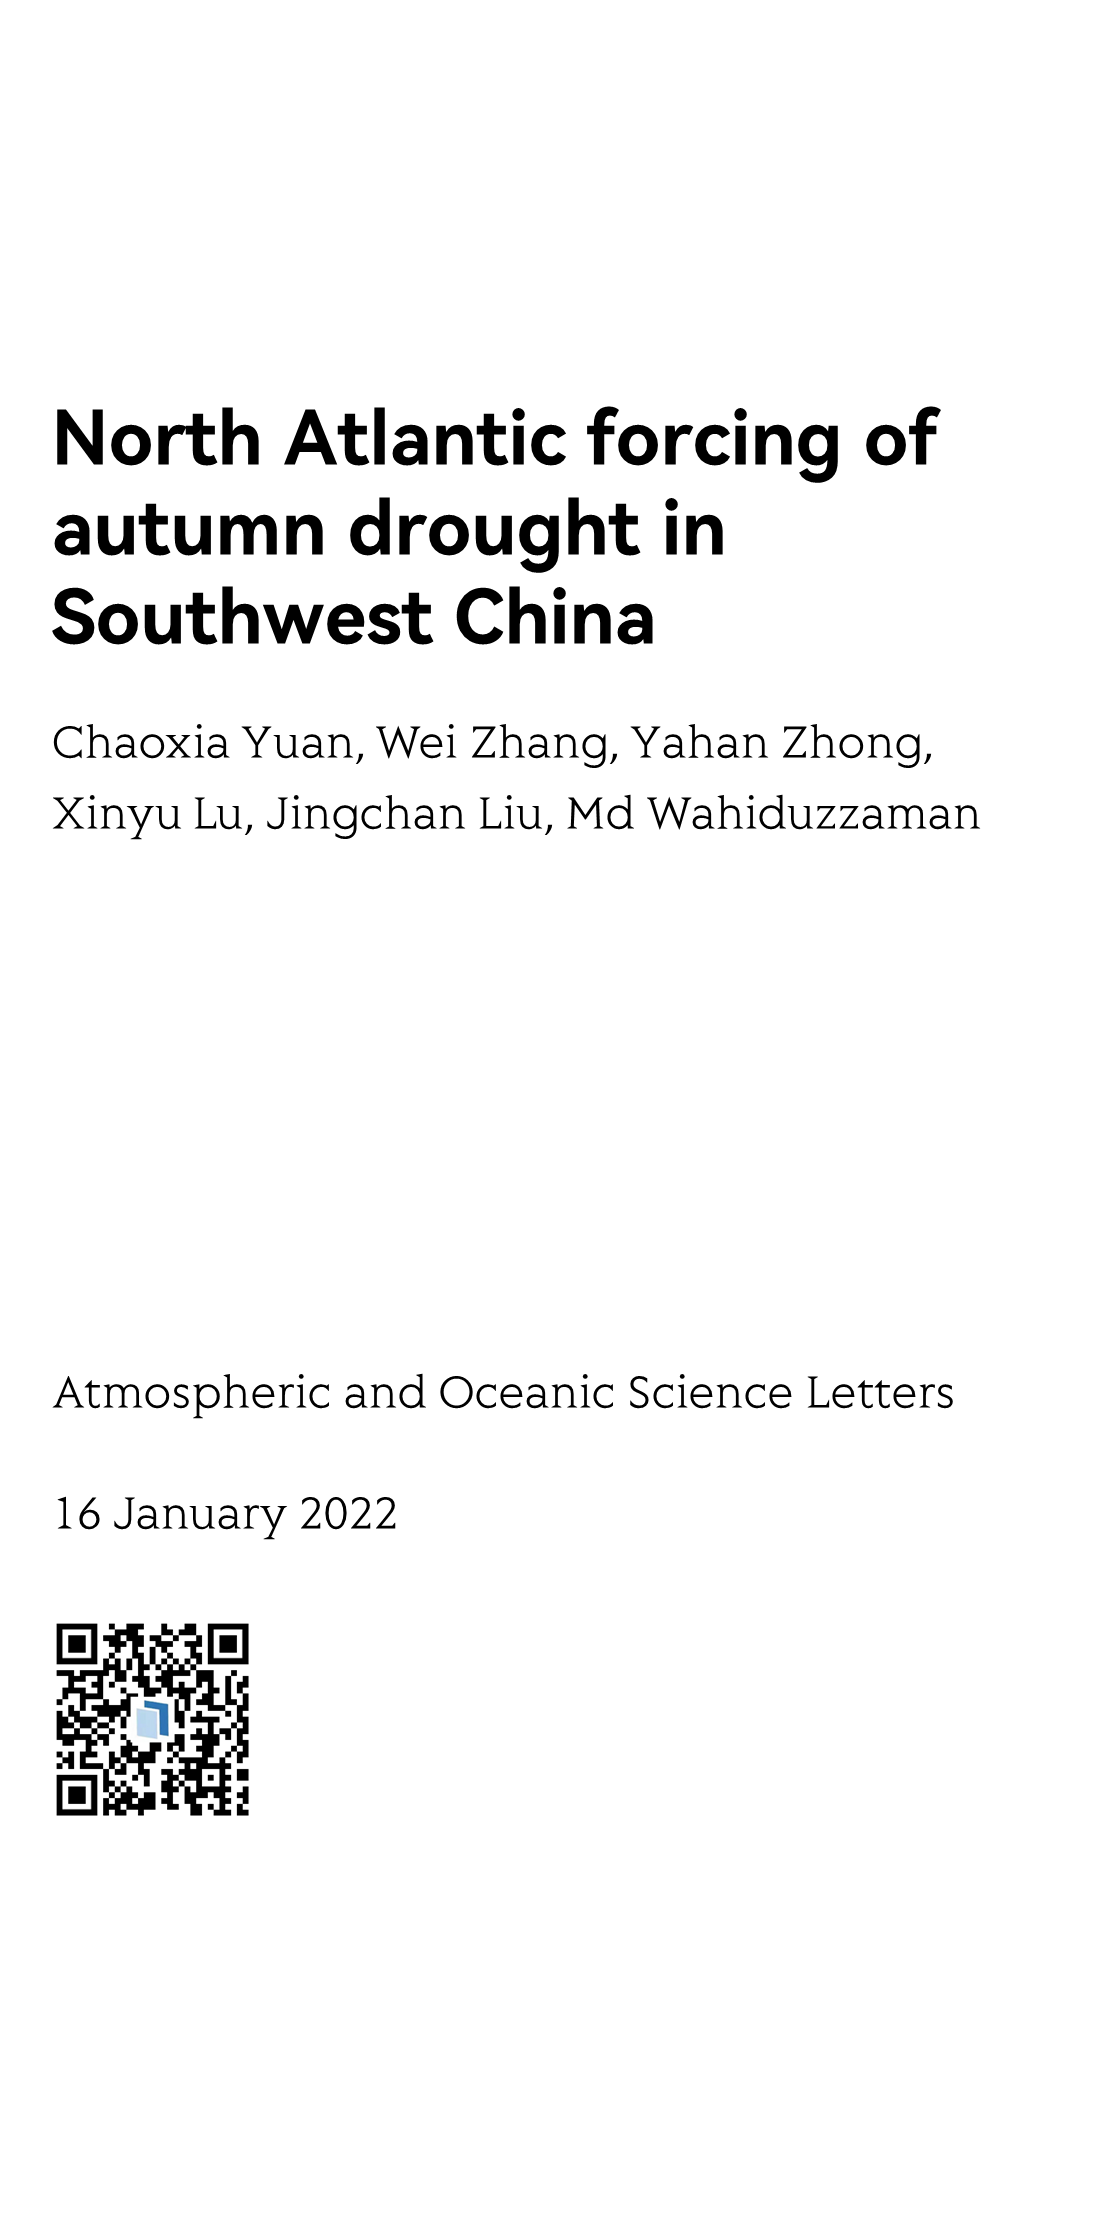 Atmospheric and Oceanic Science Letters_1